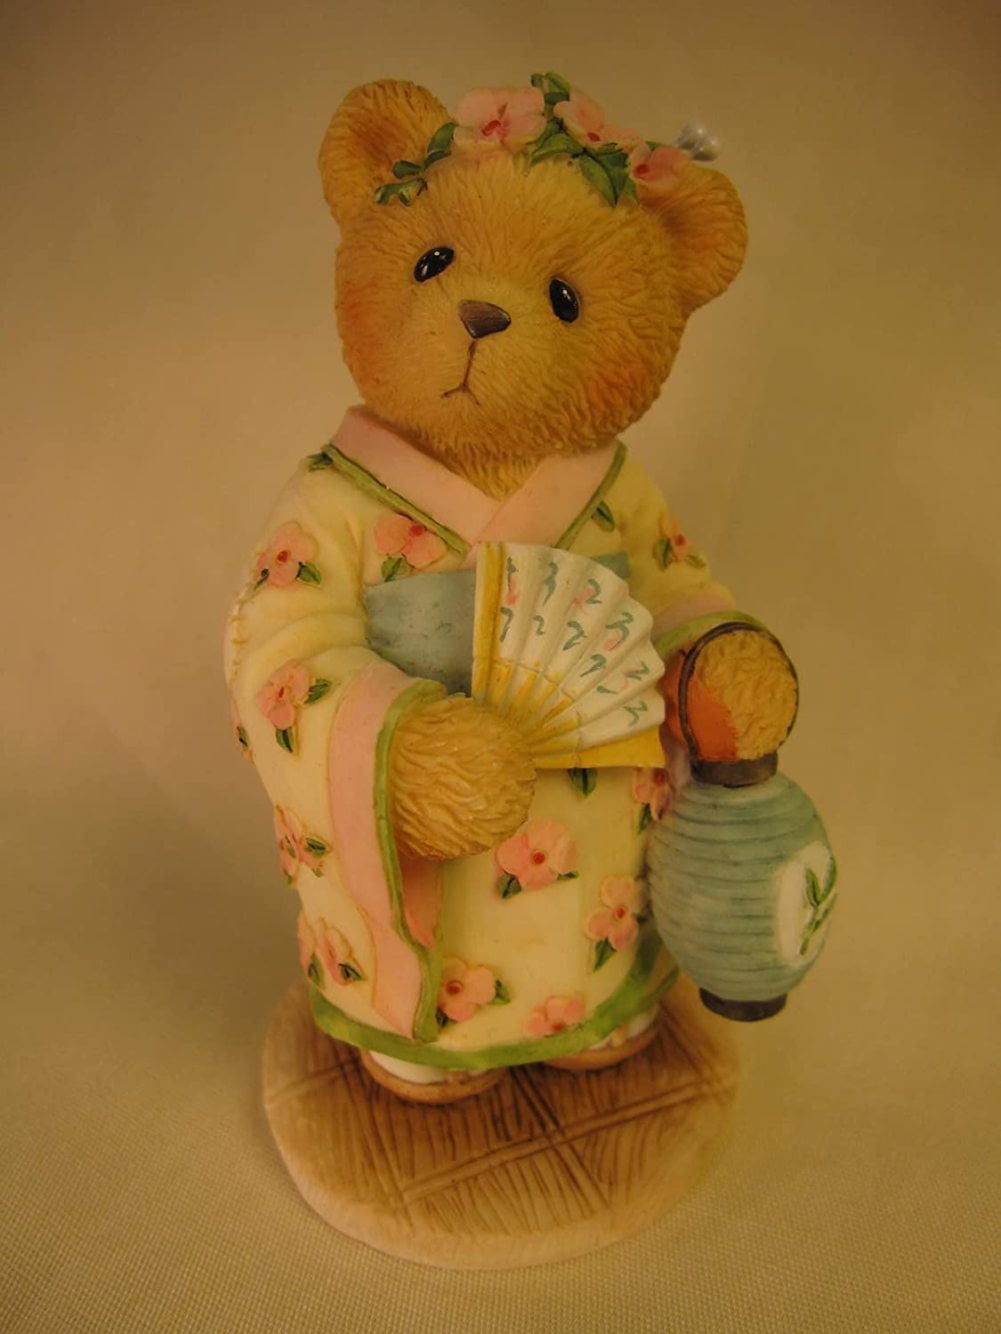 Spelling Bee 1999 for sale online Cherished Teddies Simone and Jhodi 